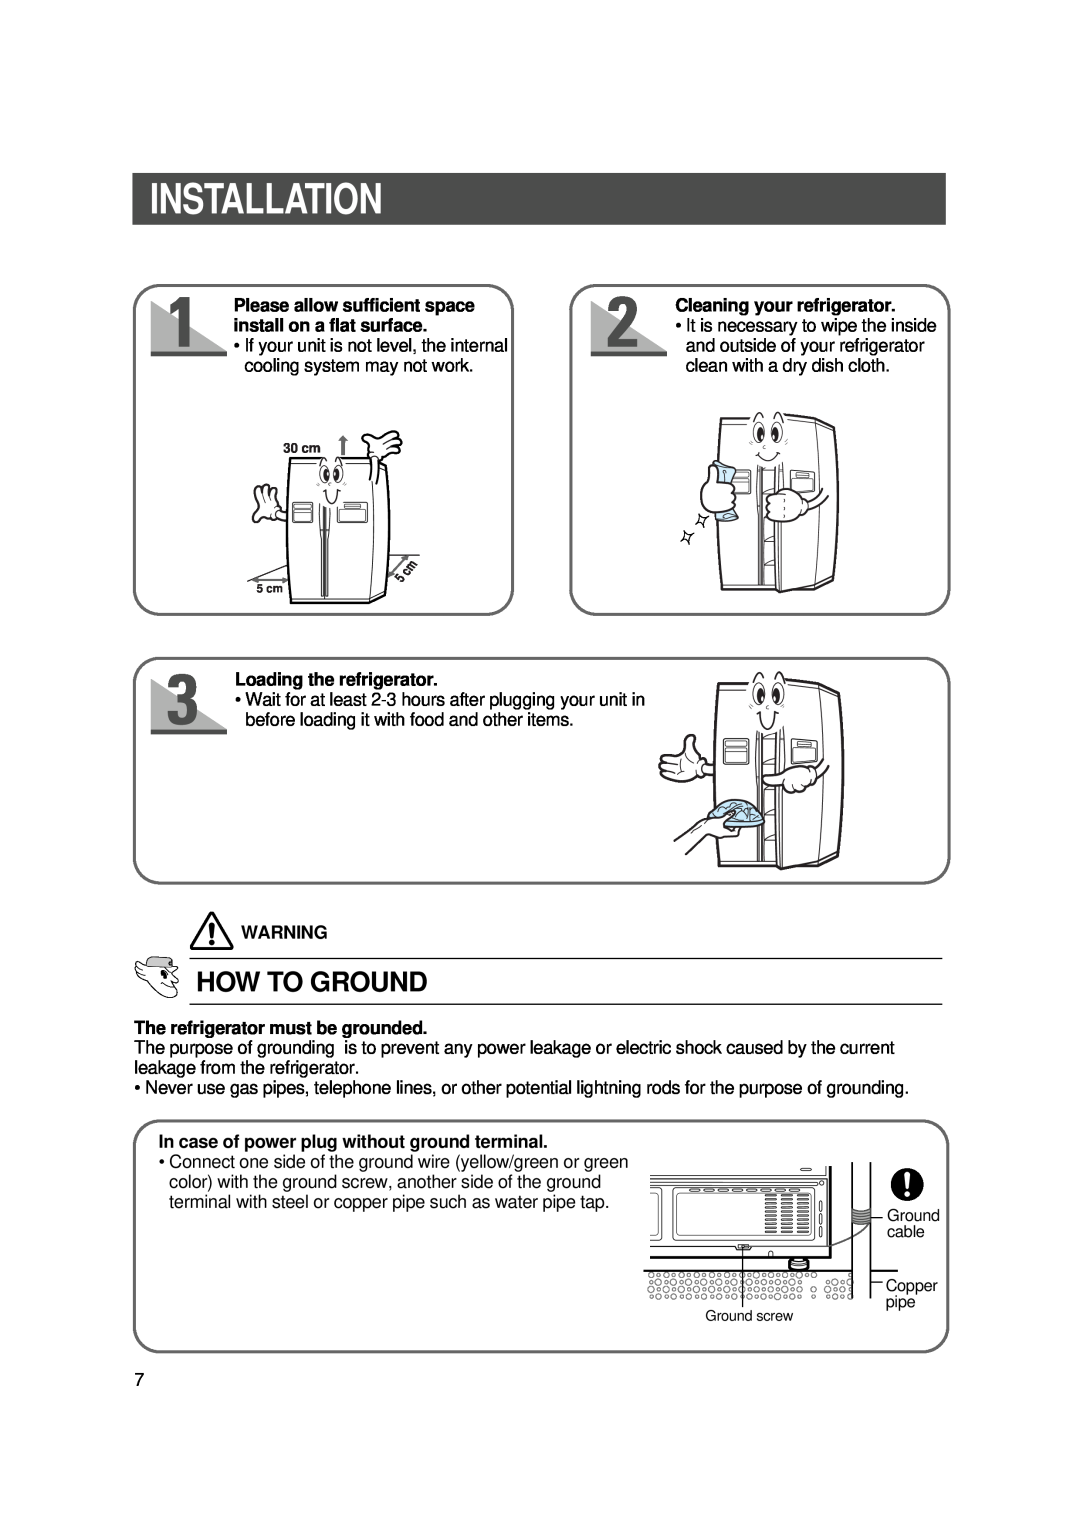 Samsung SR-S25, SR-S28BTA, SR-S27DTA Installation, How To Ground, Please allow sufficient space, Cleaning your refrigerator 